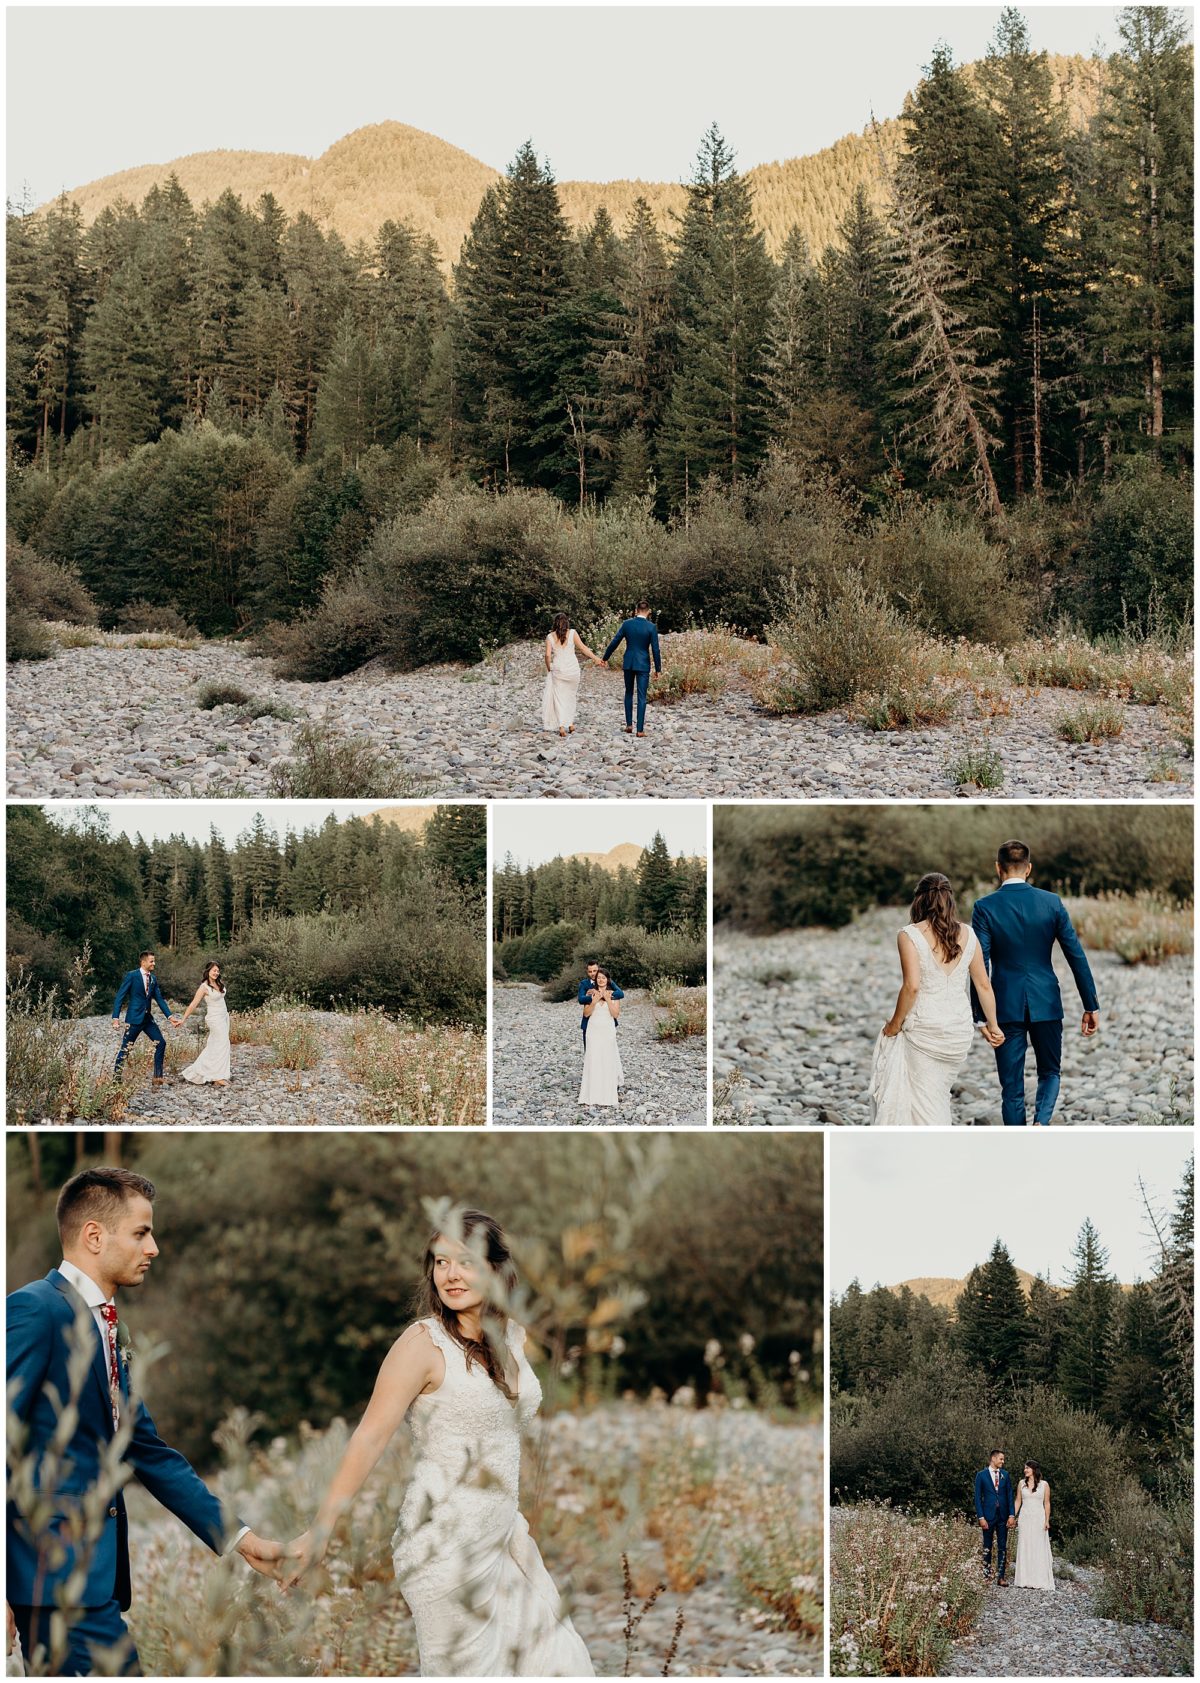 The most beautiful bridal portraits at this Camp Cascade Wedding. Photography by PNW wedding photographer, Briana Morrison